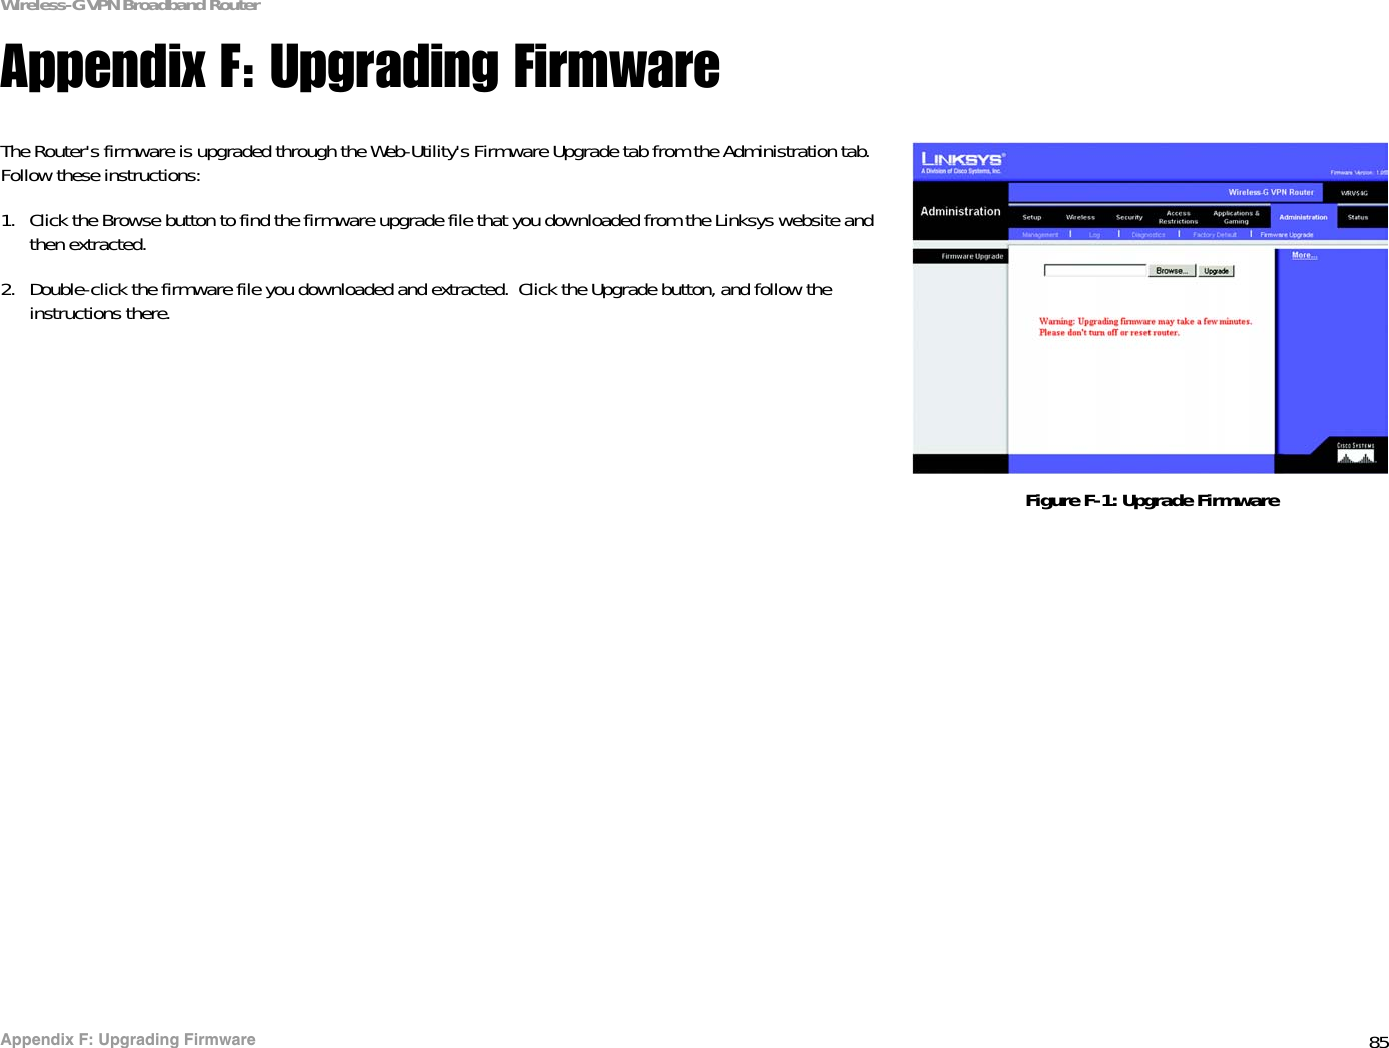 85Appendix F: Upgrading FirmwareWireless-G VPN Broadband RouterAppendix F: Upgrading FirmwareThe Router&apos;s firmware is upgraded through the Web-Utility&apos;s Firmware Upgrade tab from the Administration tab. Follow these instructions:1. Click the Browse button to find the firmware upgrade file that you downloaded from the Linksys website and then extracted. 2. Double-click the firmware file you downloaded and extracted.  Click the Upgrade button, and follow the instructions there.Figure F-1: Upgrade Firmware